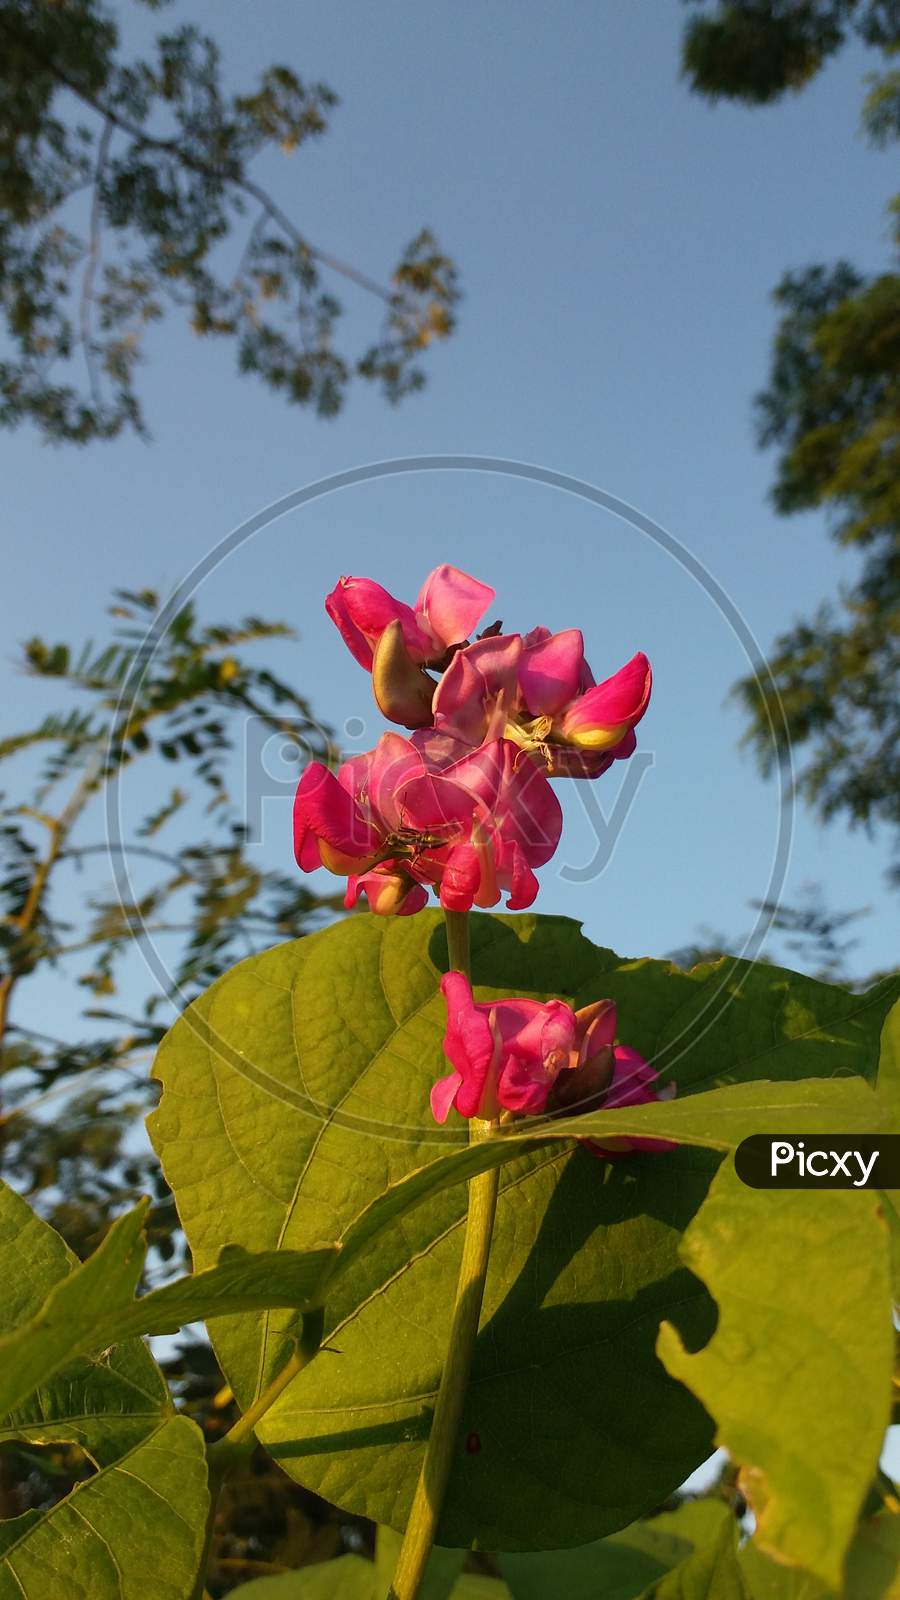 Flowers mobile photography ideas